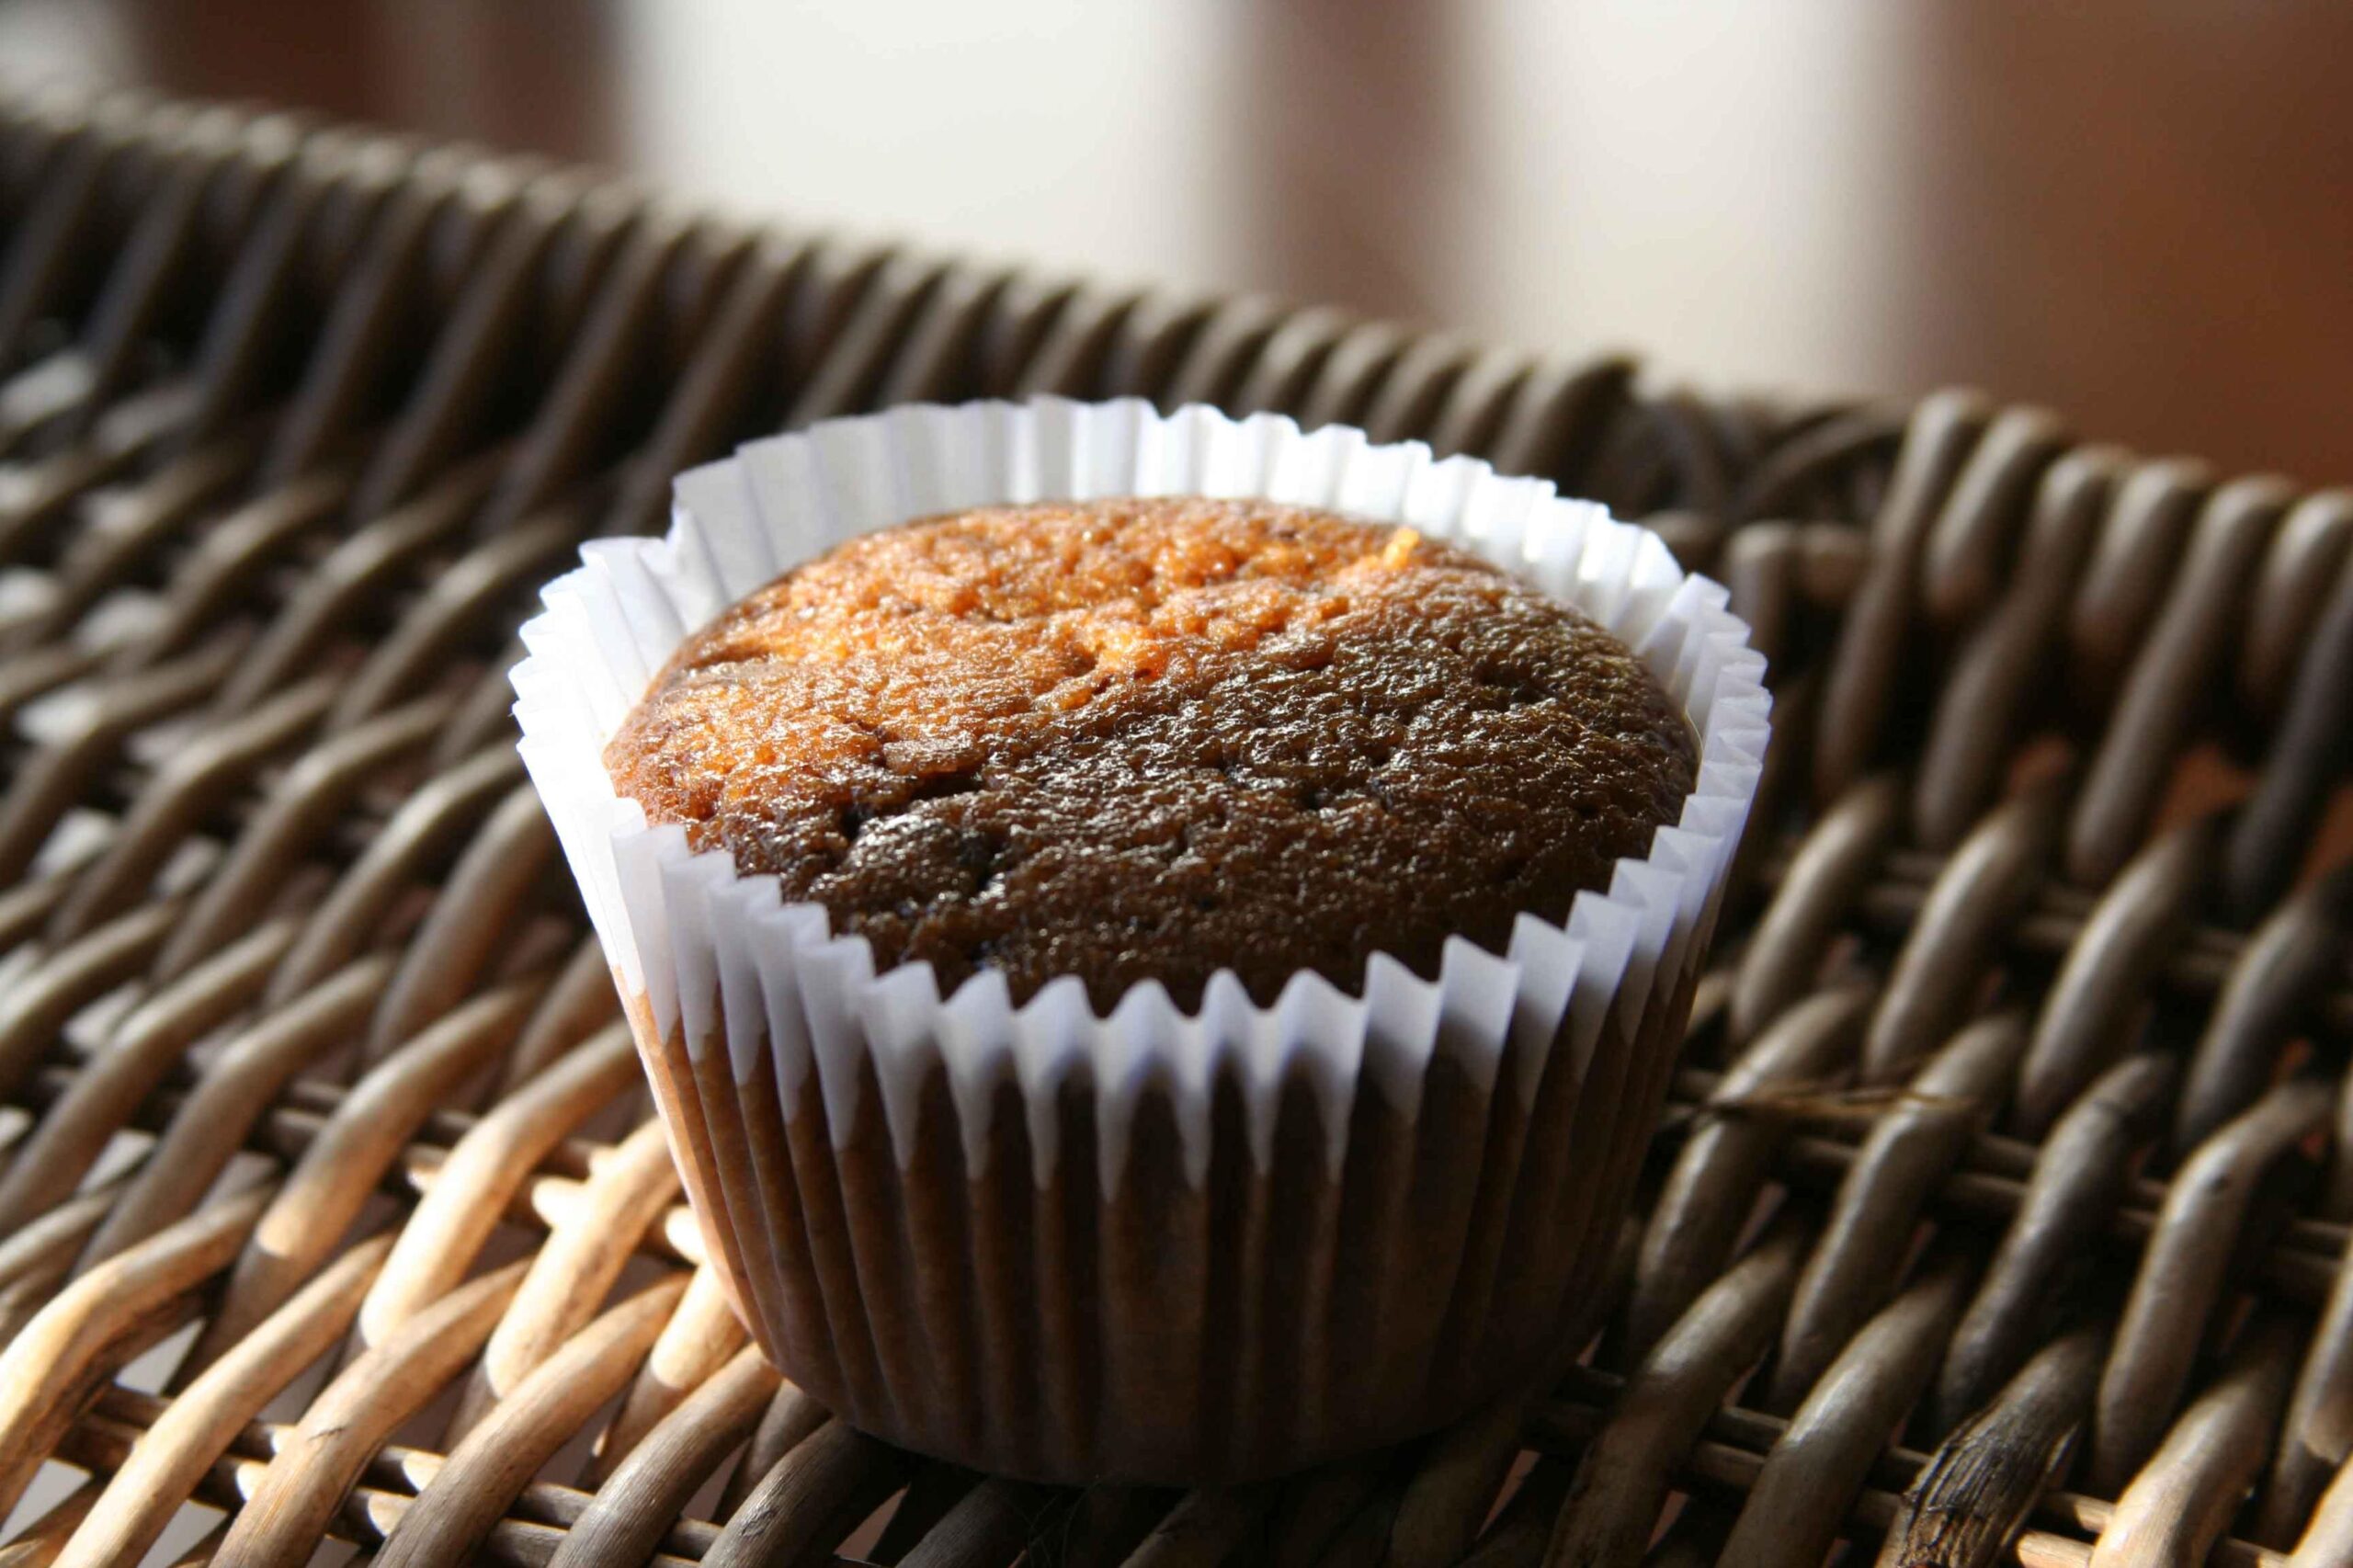  Satisfy your coffee cravings with these delicious muffins